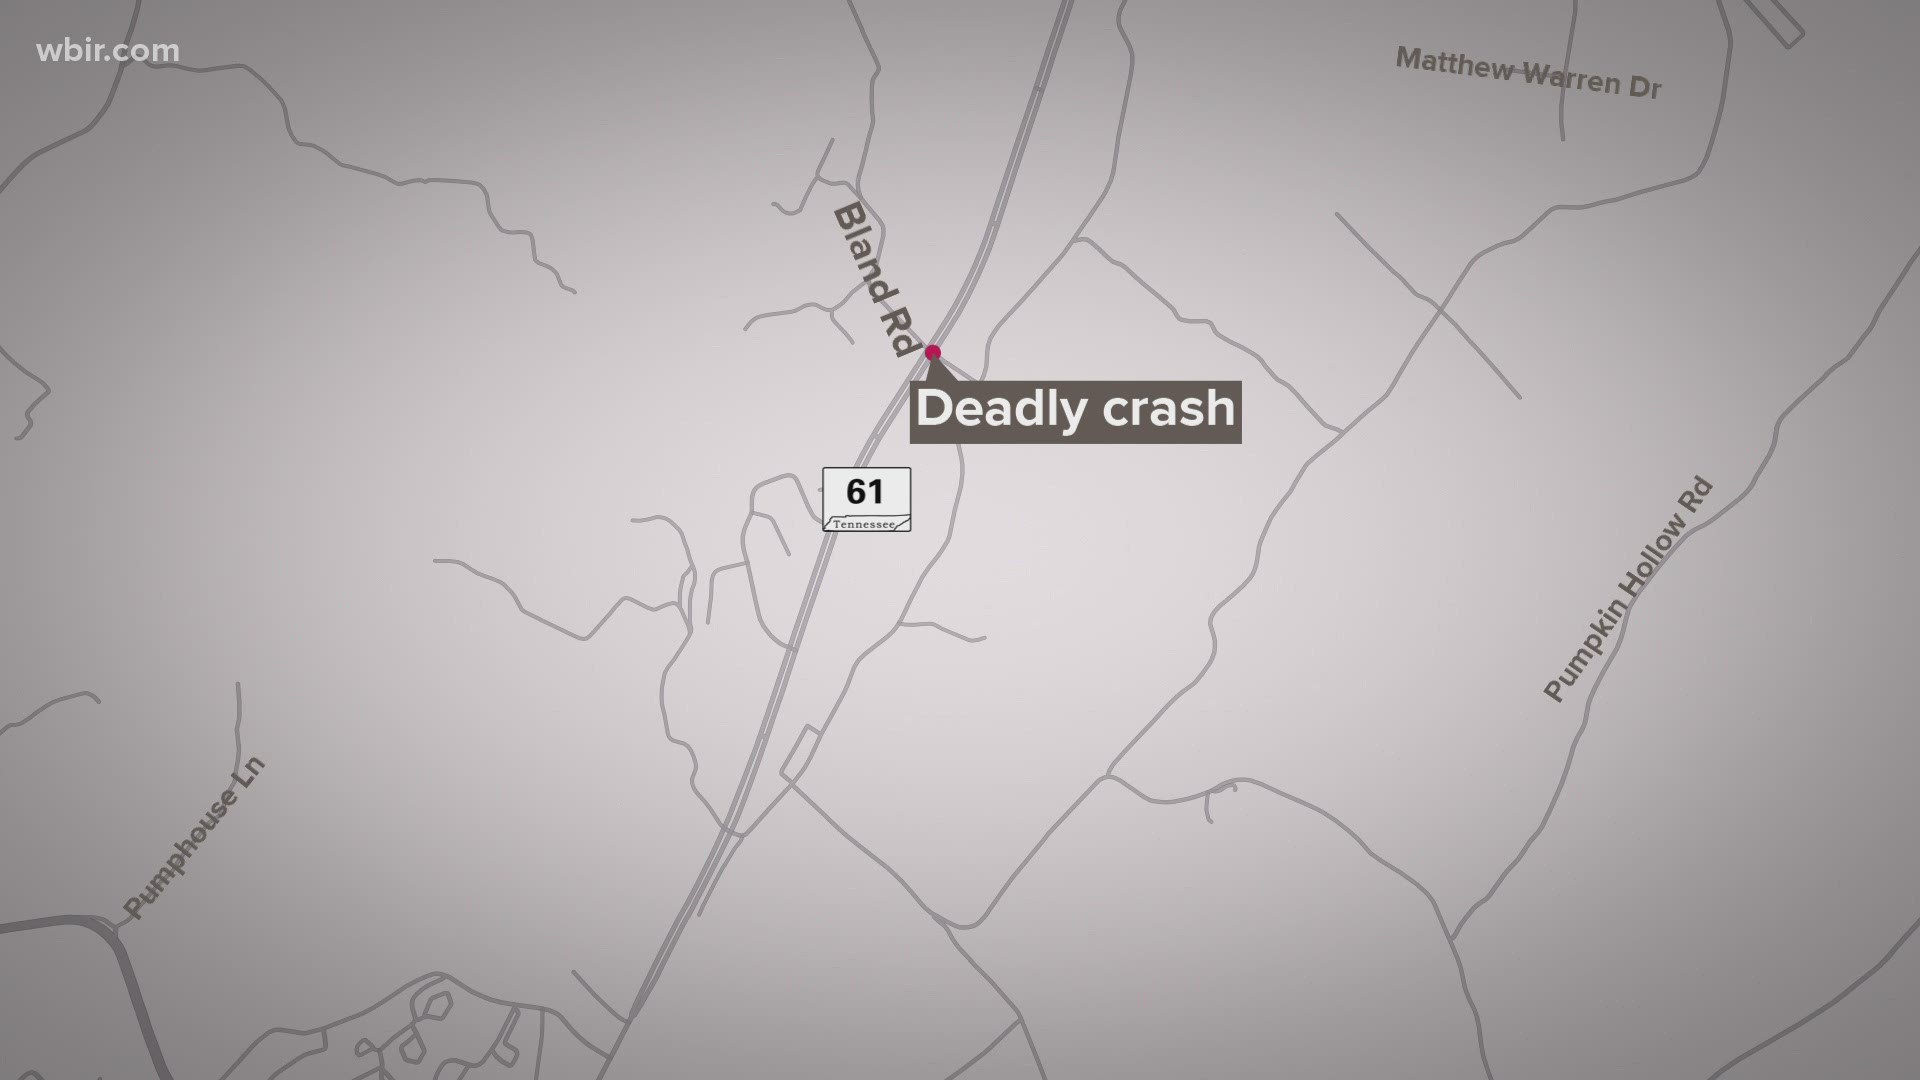 A man died Thursday in a crash on a Clinton road. He wasn't wearing a seat belt.